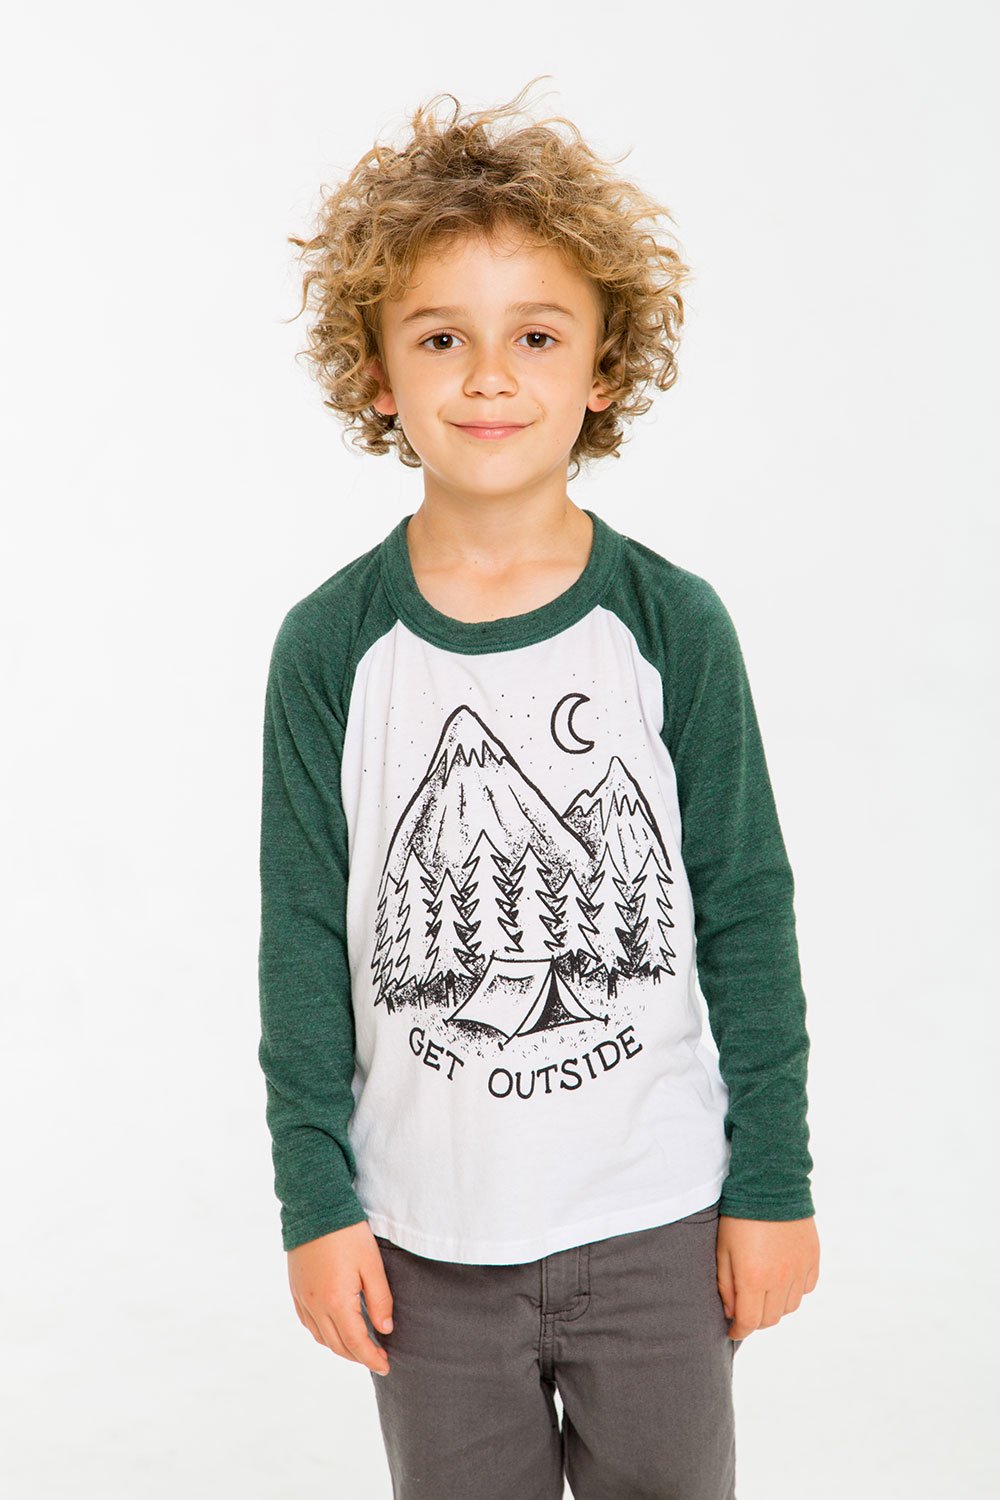 Chaser Kids - Boys Cotton Jersey in Get Outside